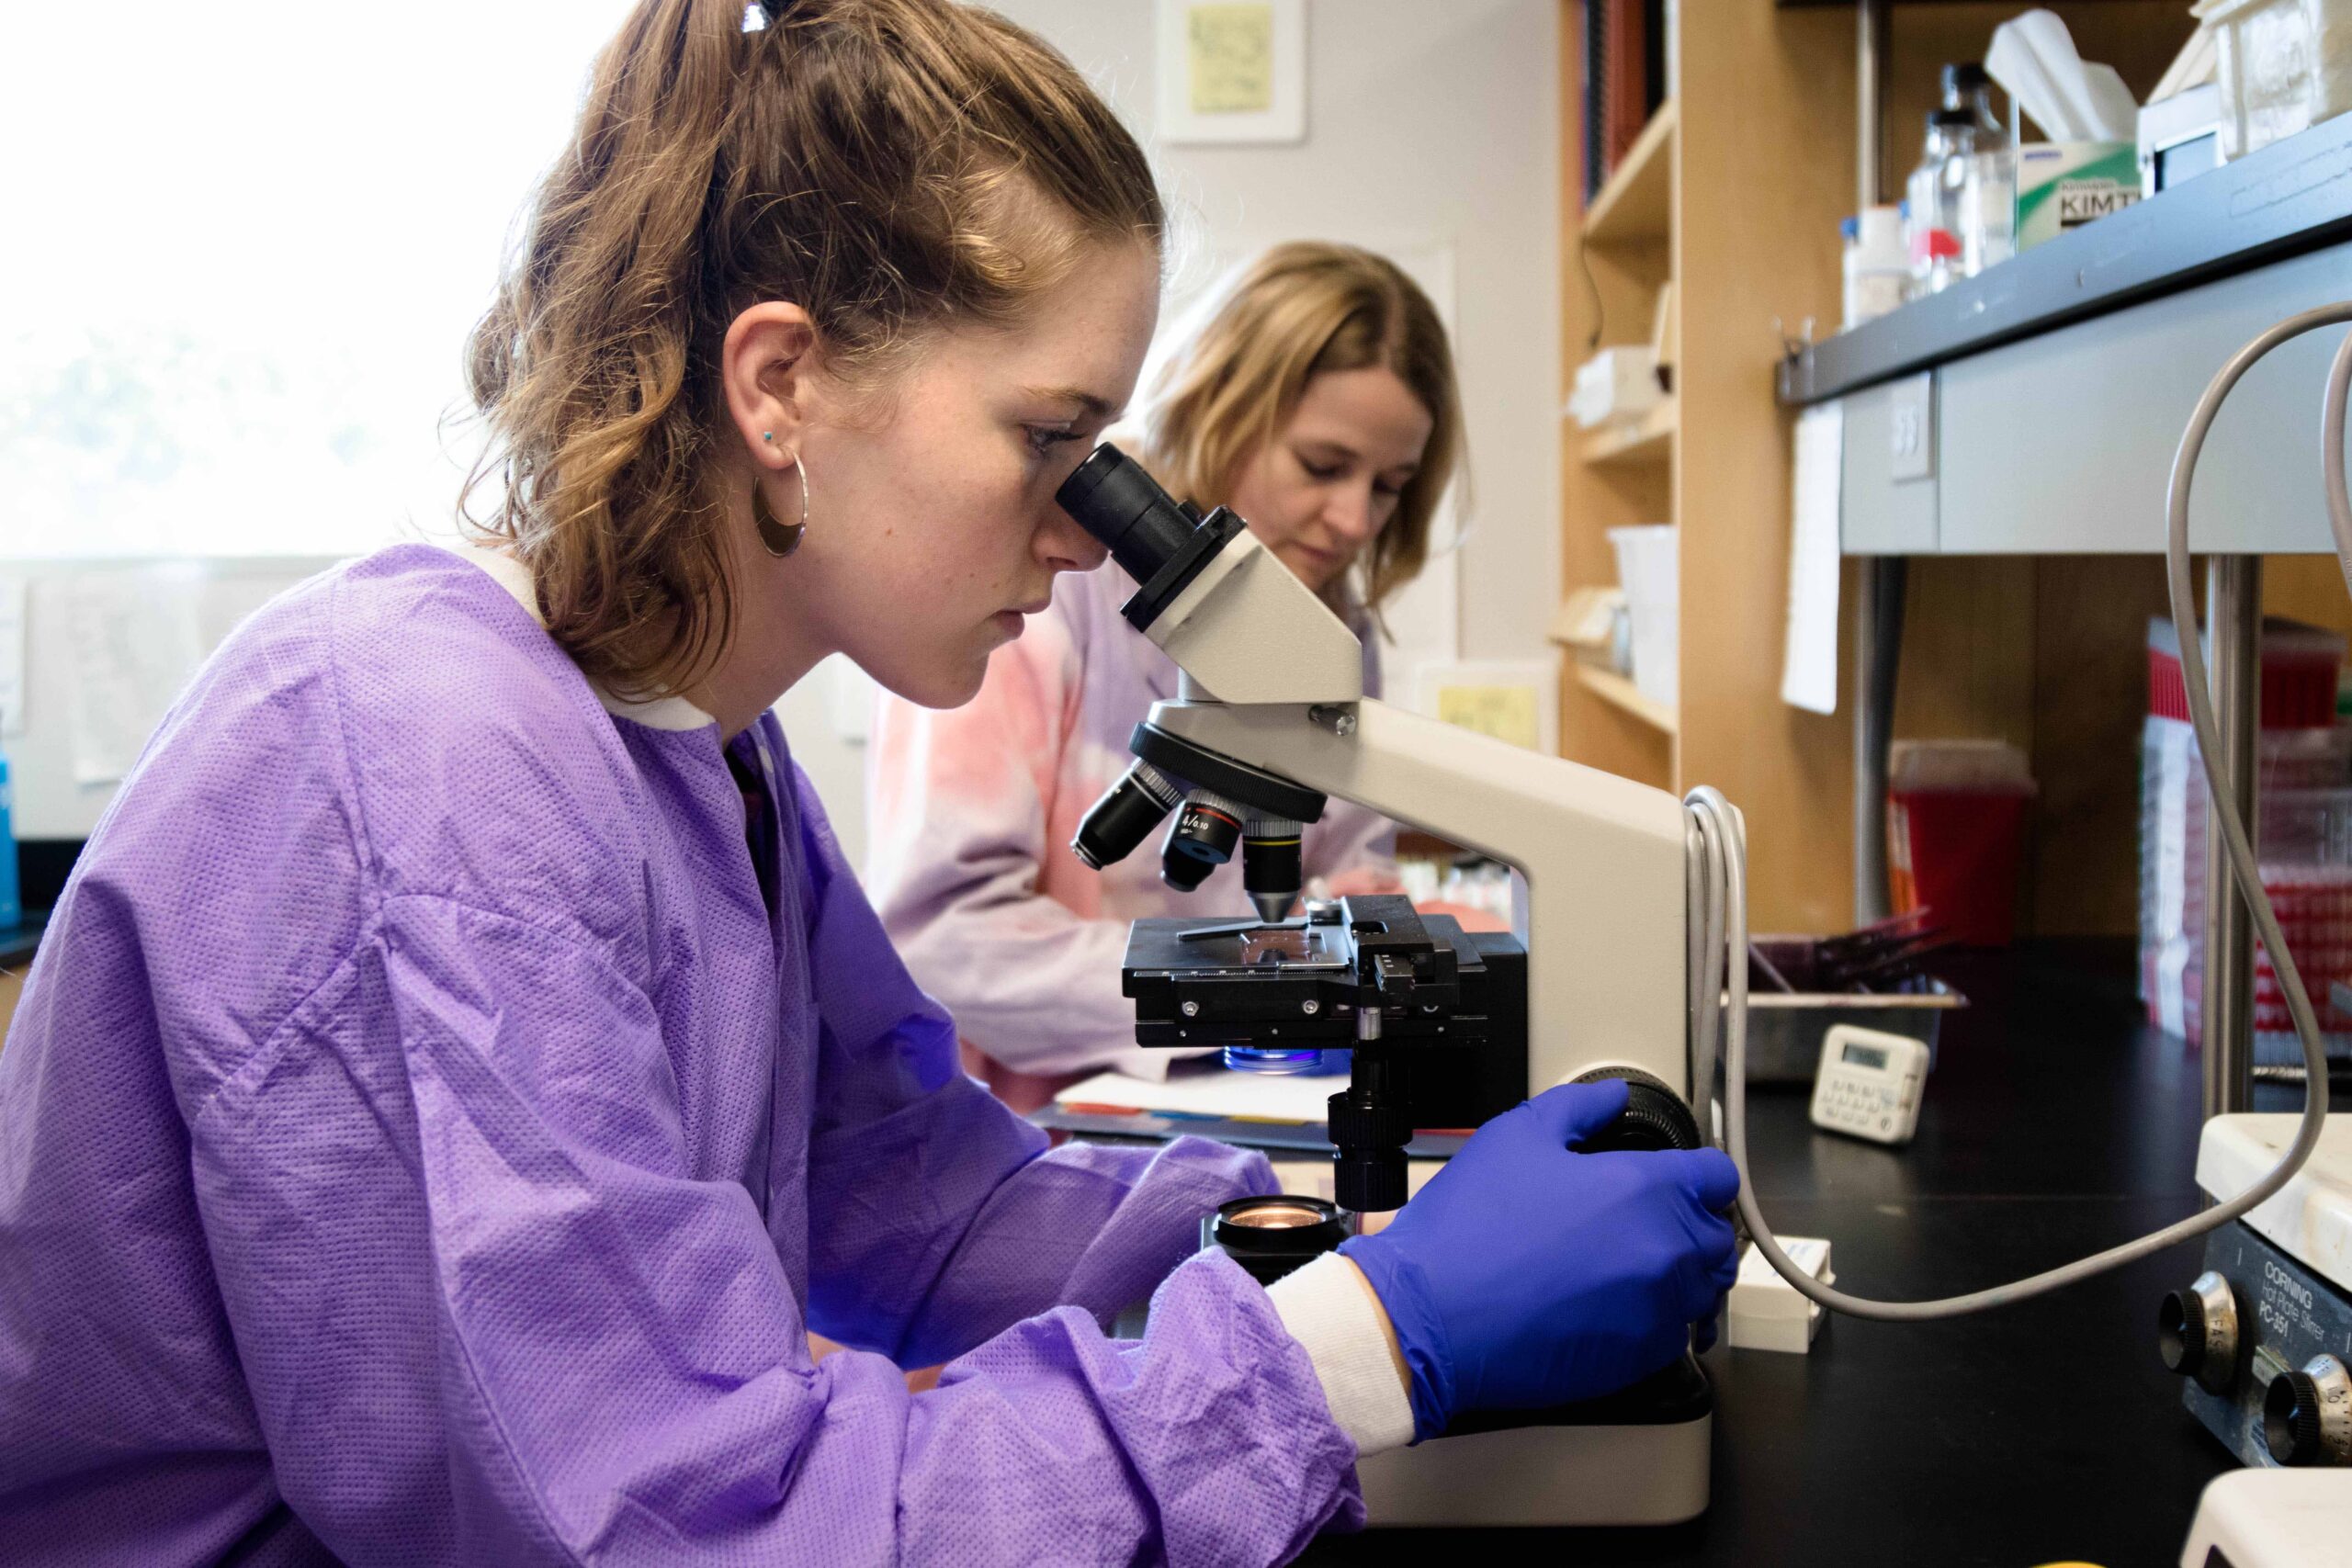 A student in purple lab coat and purple gloves peers into a microscope